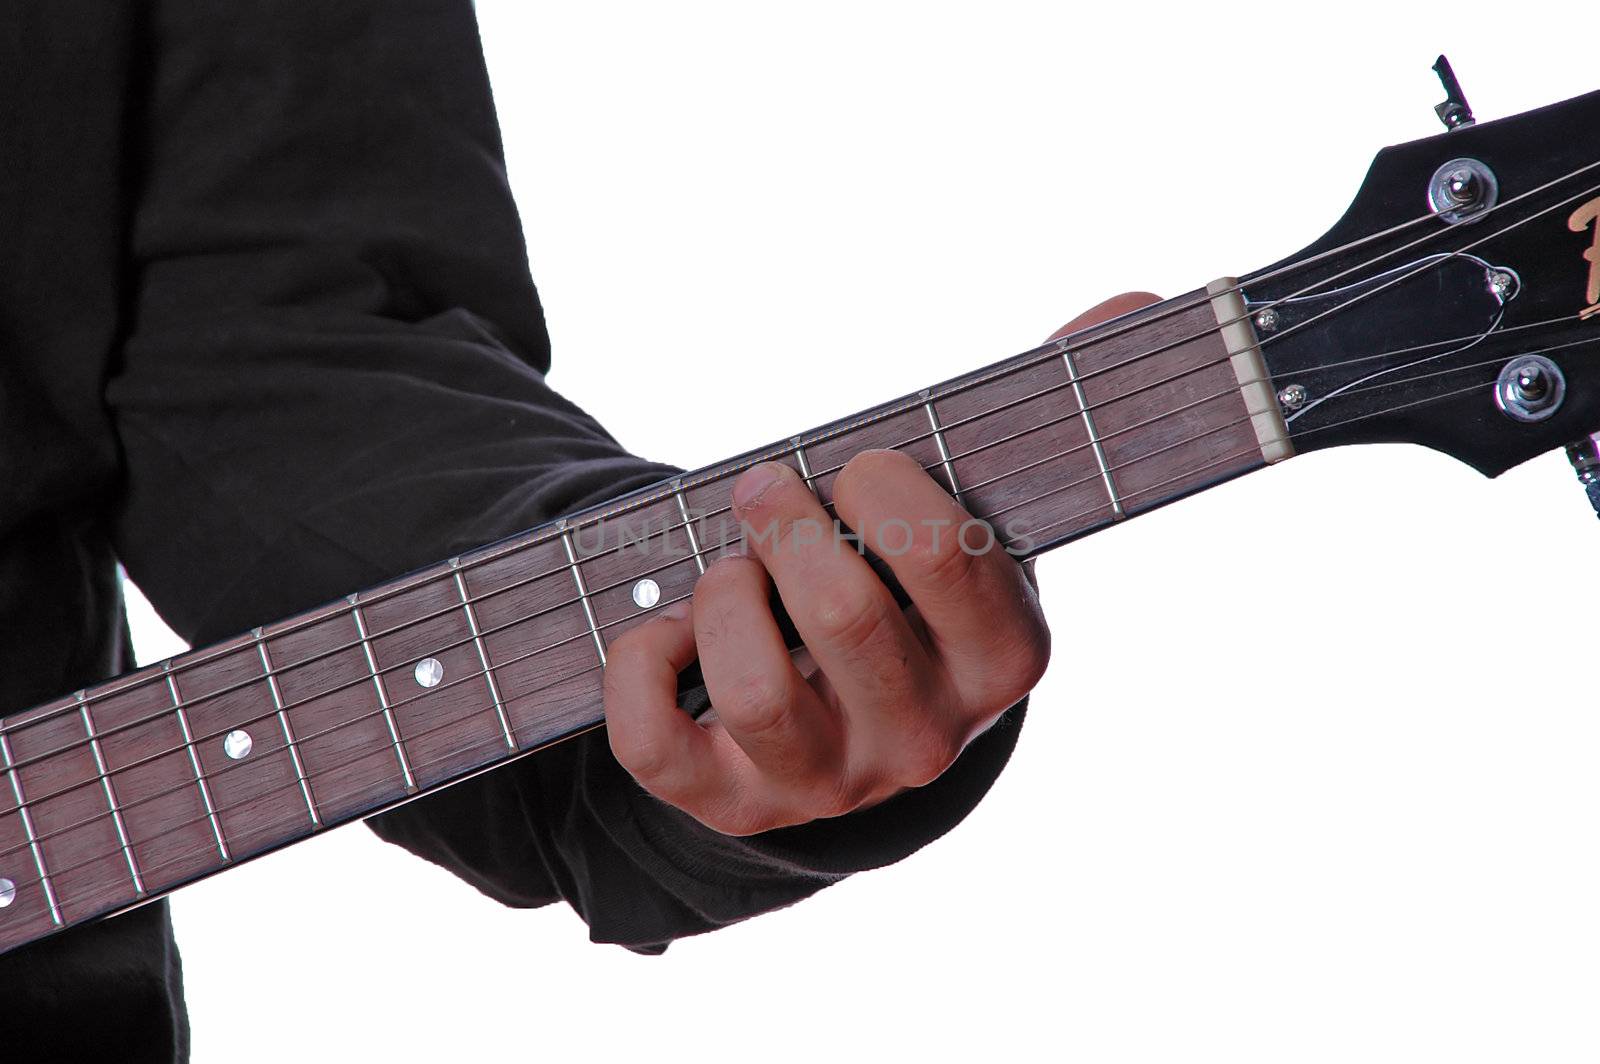 Close-up view of guitar and musician's hands